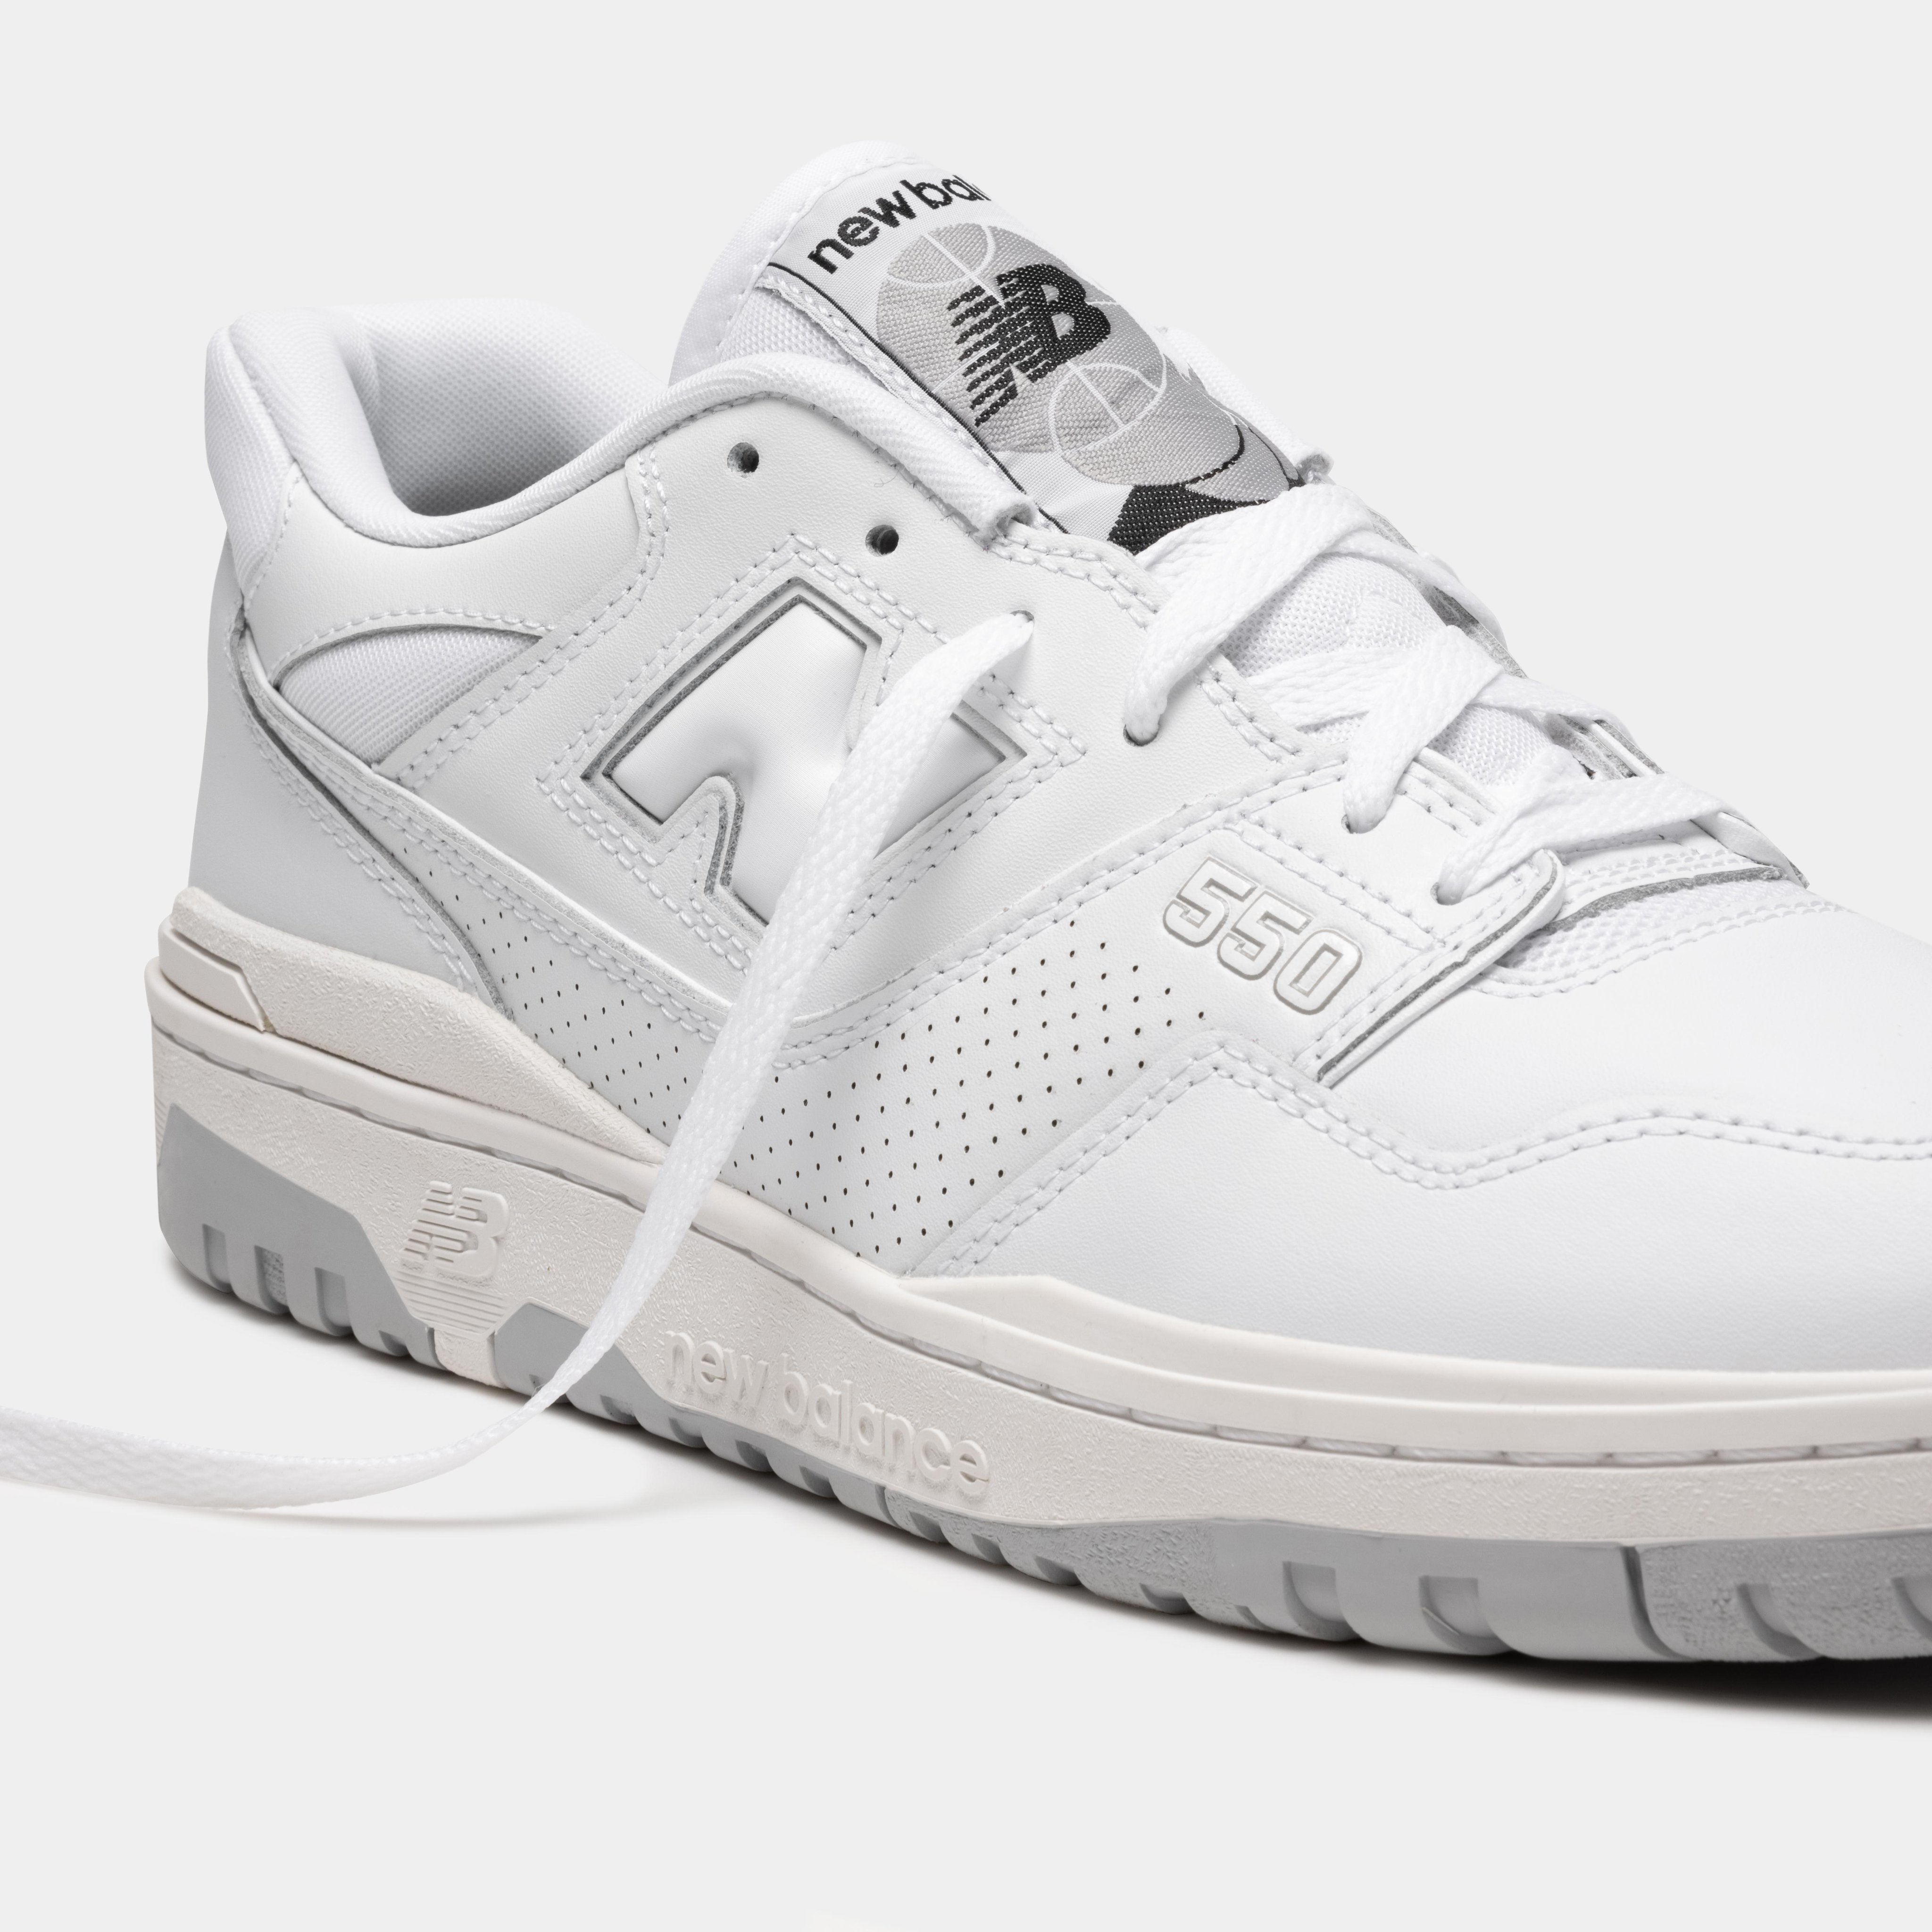 Foot Locker on "Modern Classic. #Newbalance 550 launches 1/21 in a crisp all-white colorway. Reservations are now open via the Foot App. https://t.co/NdHo0xSASI" / Twitter